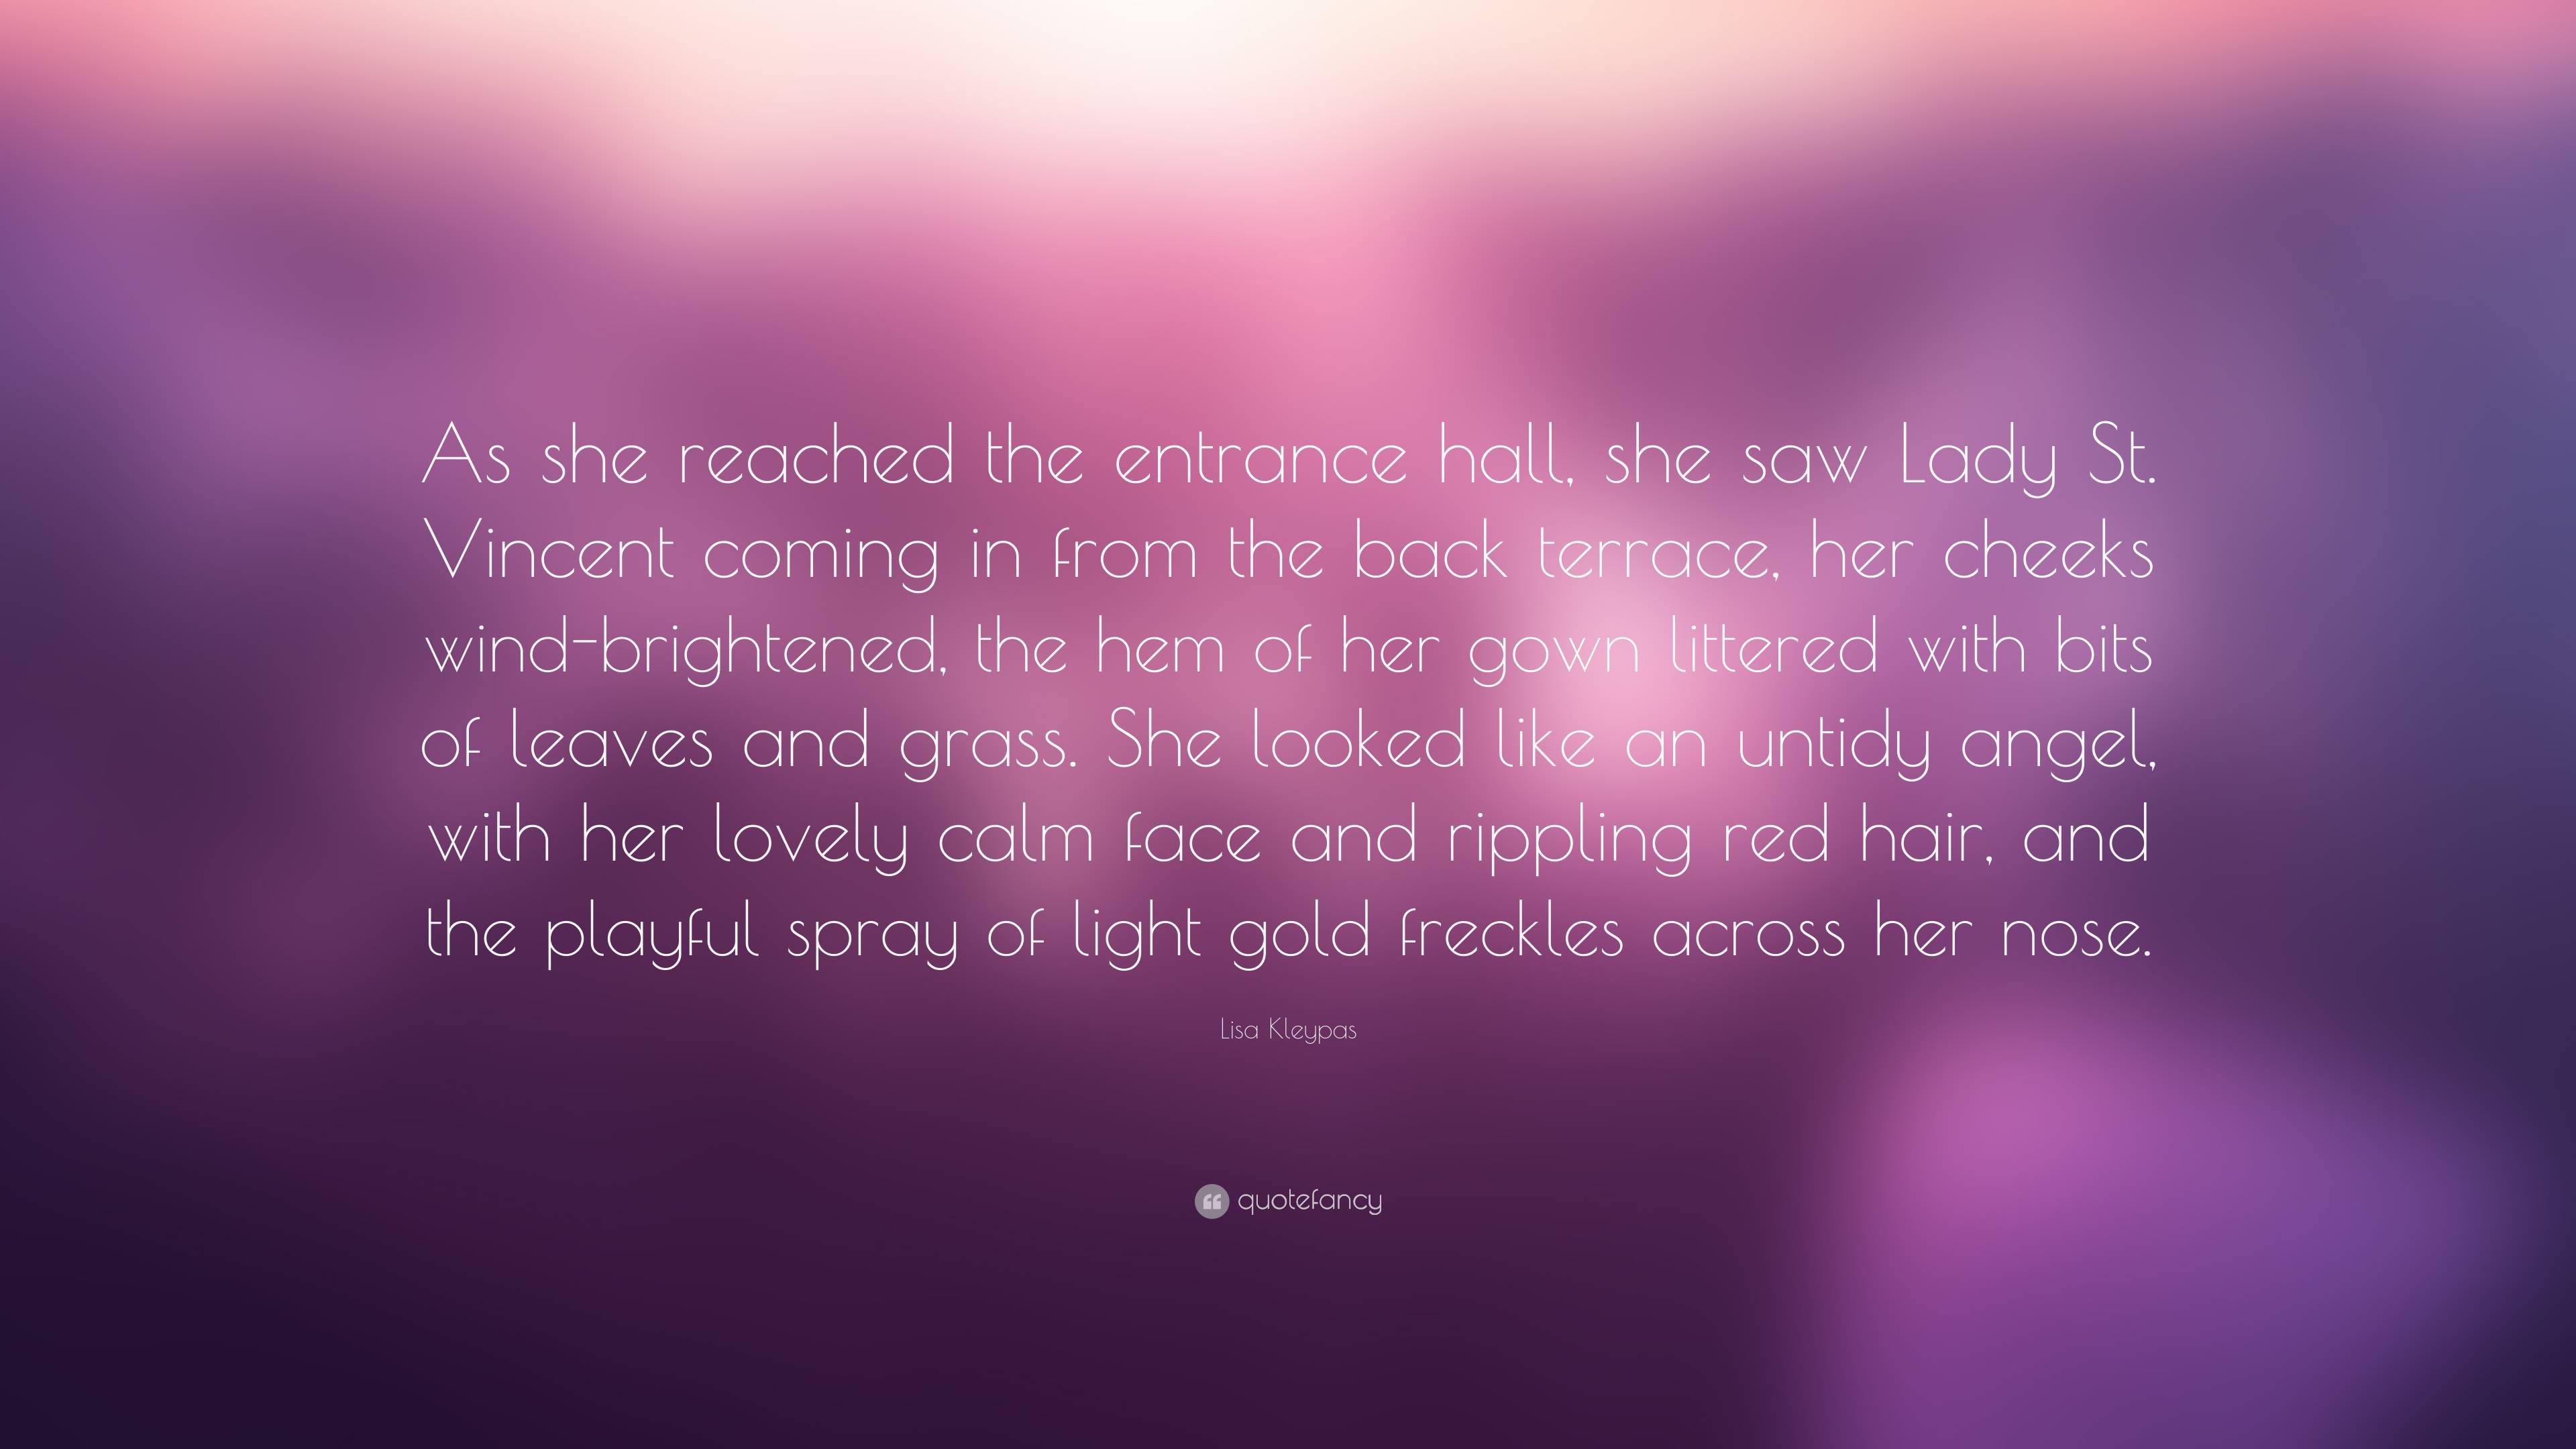 Lisa Kleypas Quote: “As she reached the entrance hall, she saw Lady St ...